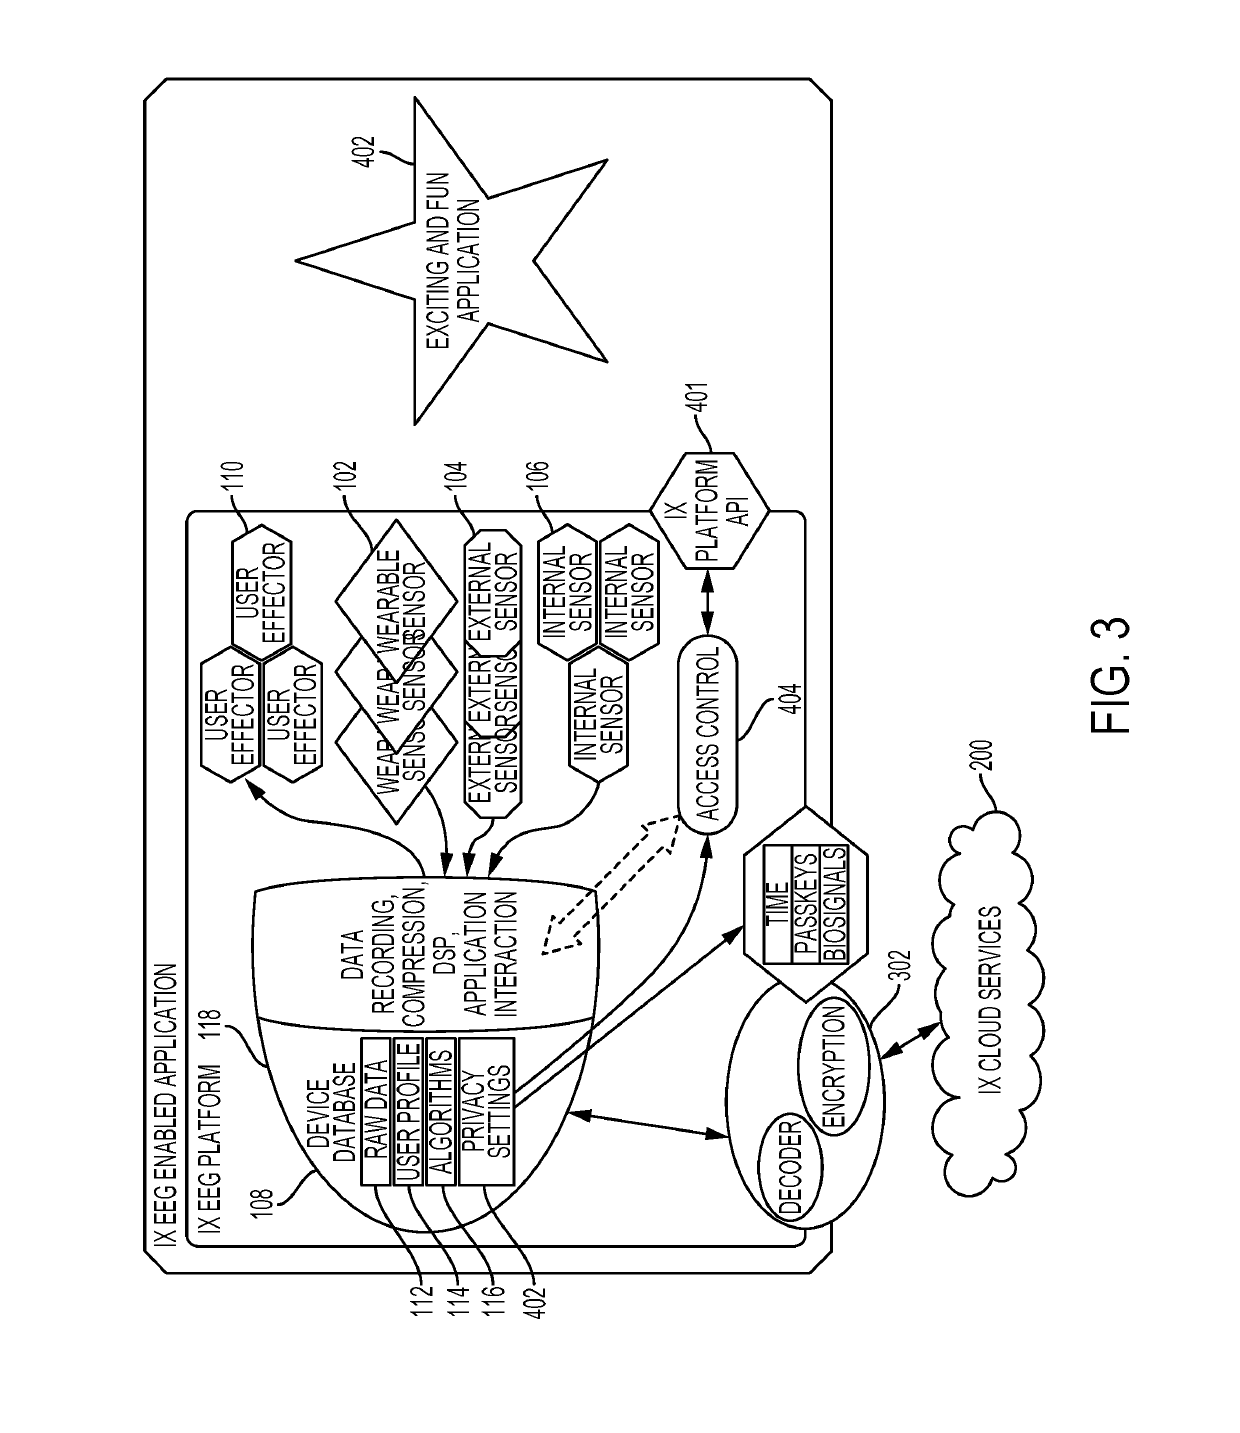 Systems and methods for collecting, analyzing, and sharing bio-signal and non-bio-signal data